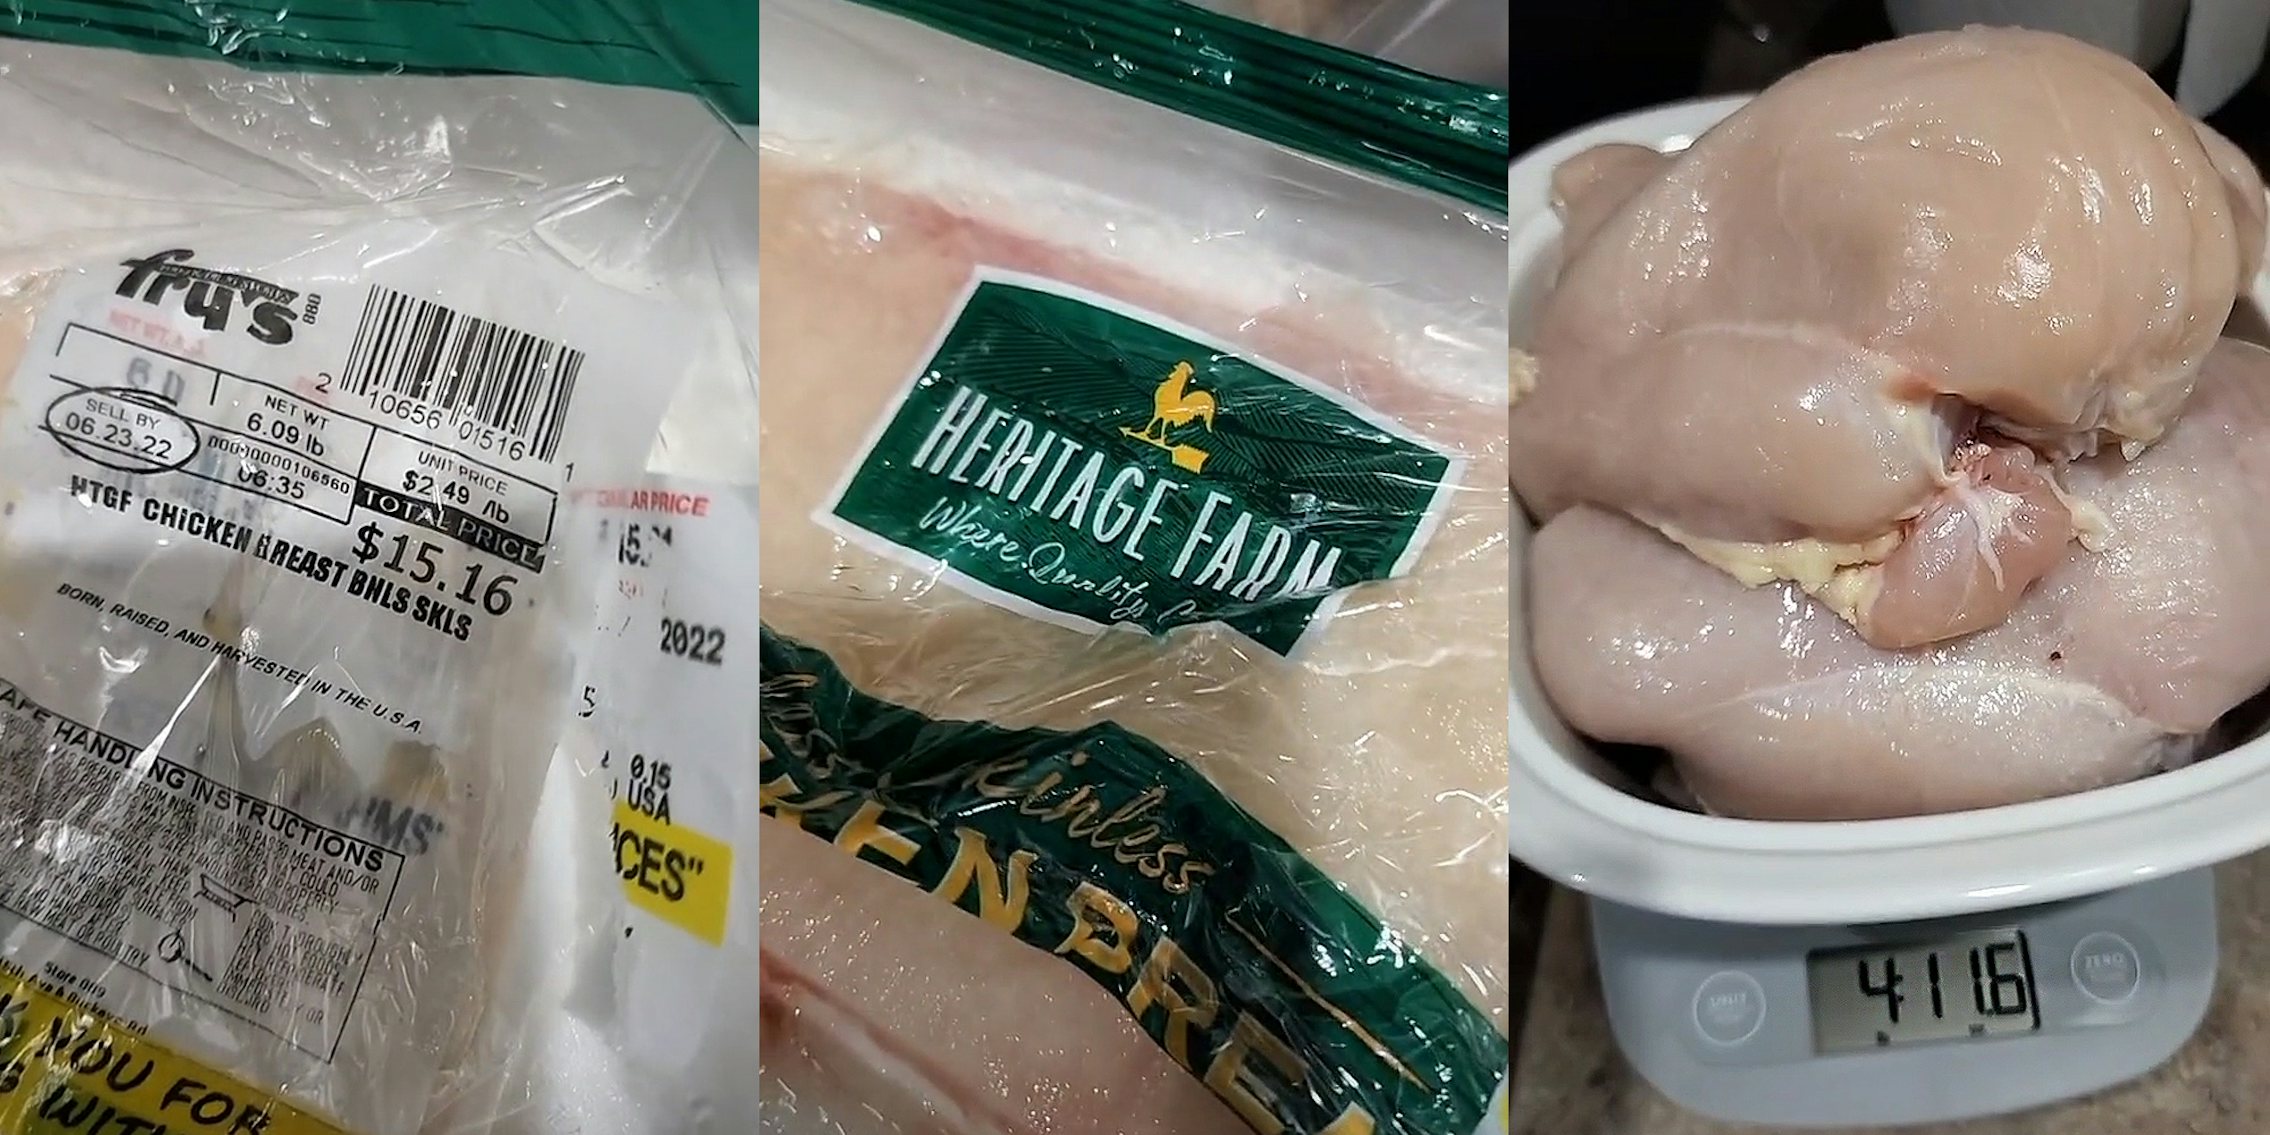 Heritage Farm chicken packaging '6.09 lb' (l) Heritage Farm packaging outside with logo (c) Heritage Farm chicken in bowl scale 2 lbs short of weight labeled on packaging (r)